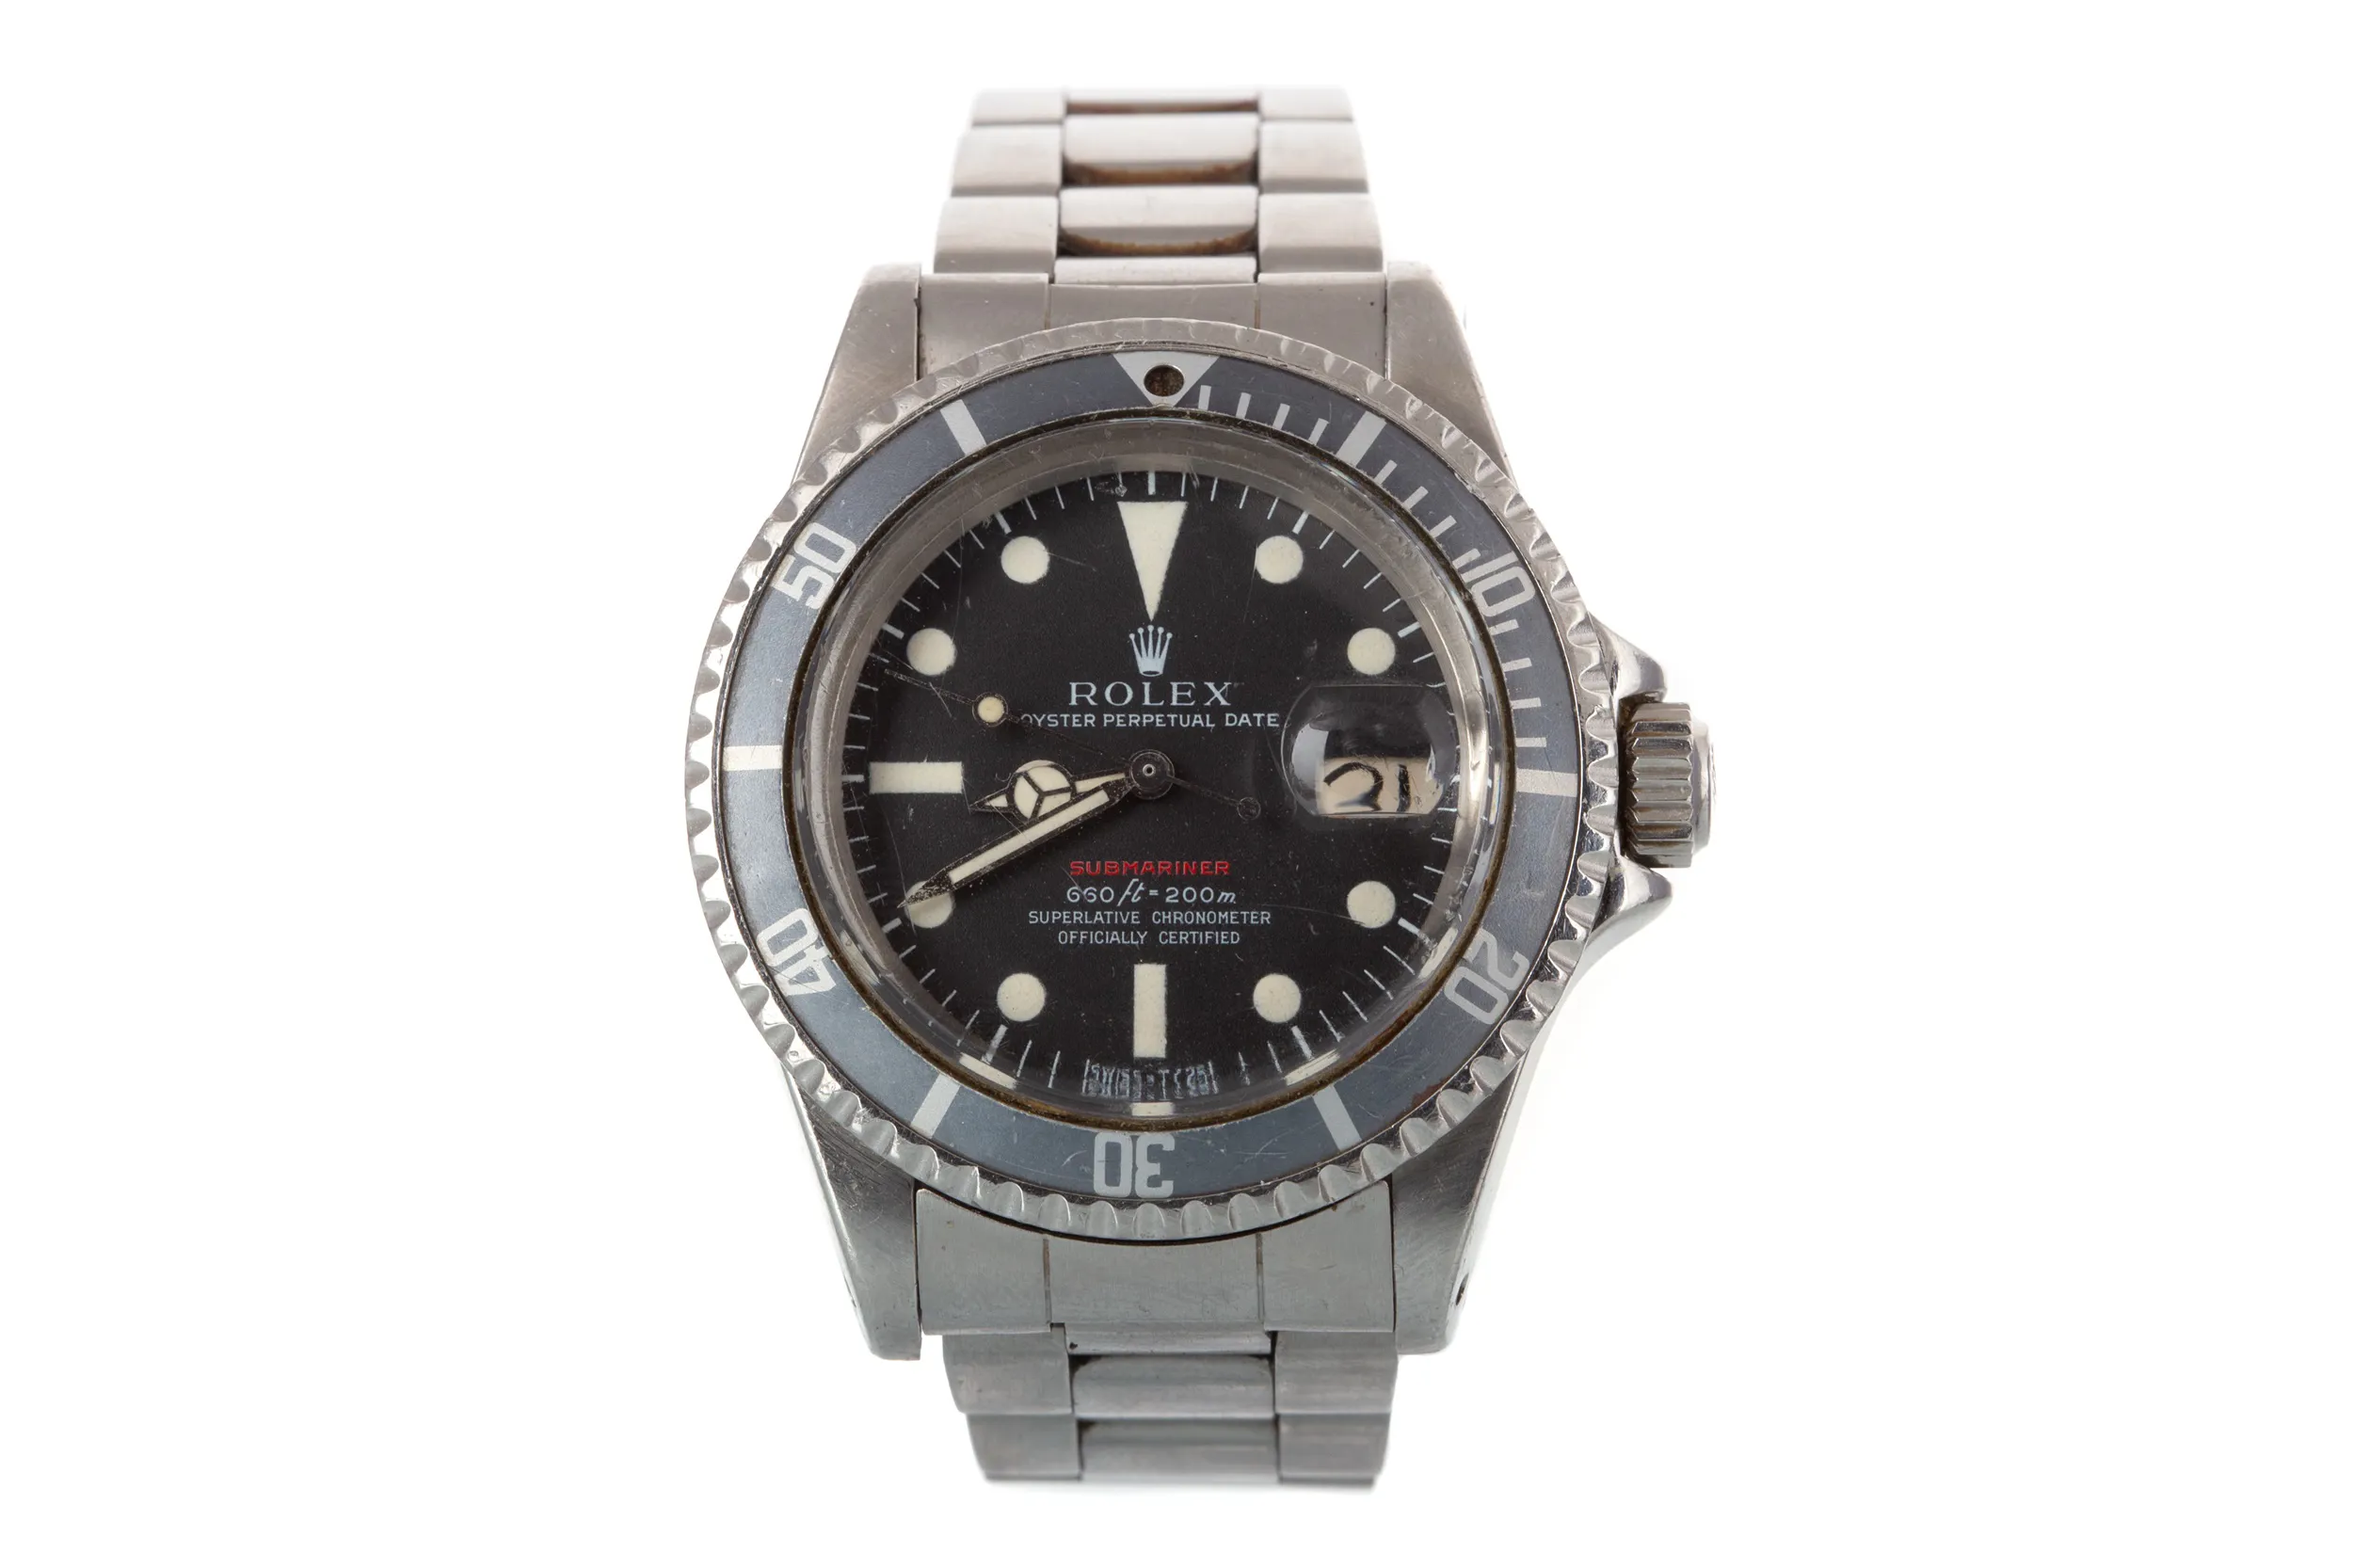 Rolex Submariner 1680 40mm Stainless steel and aluminum